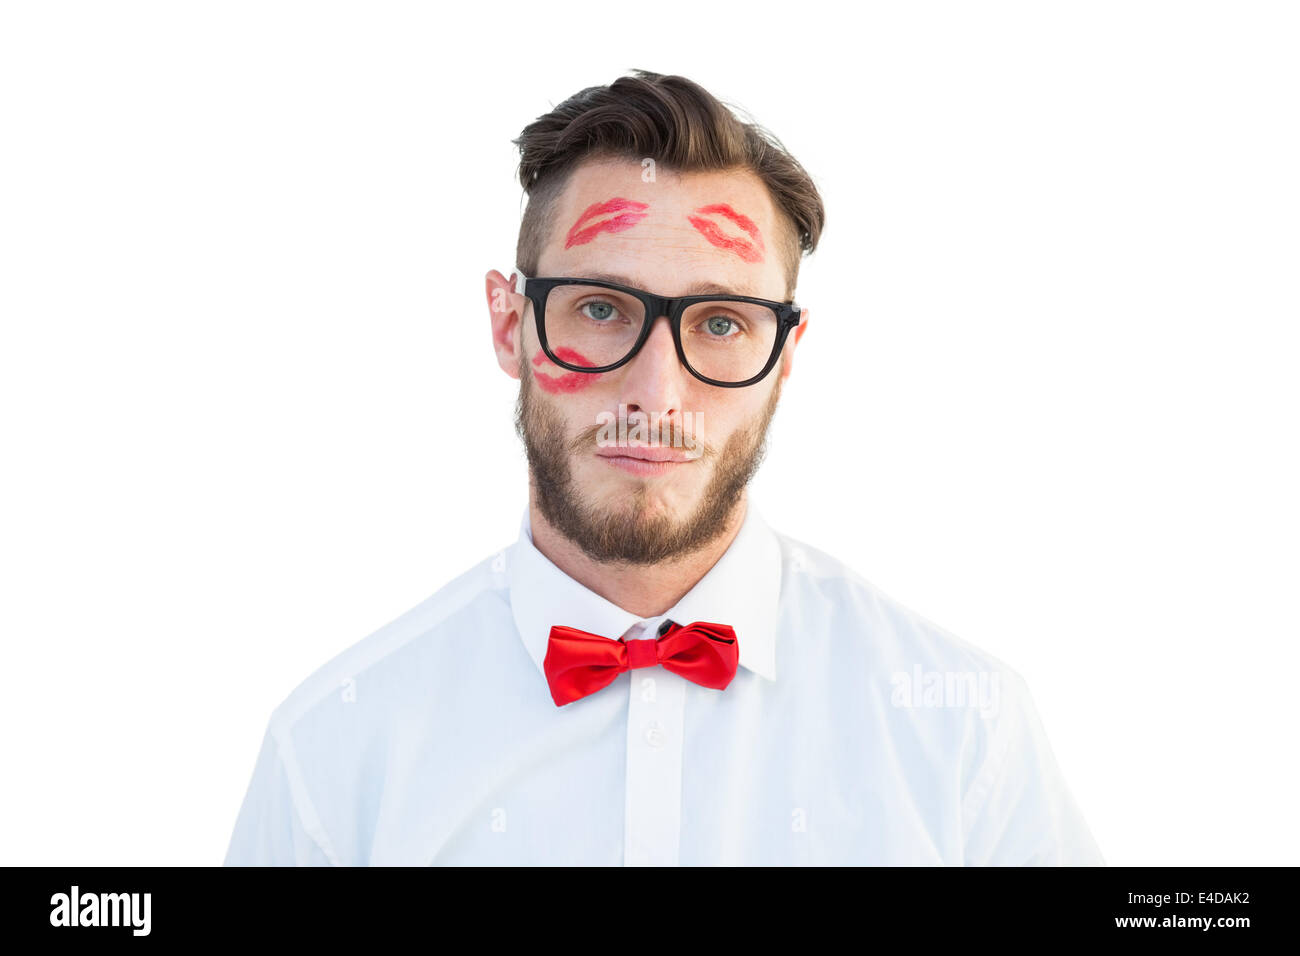 Geeky hipster with kisses on his face Stock Photo